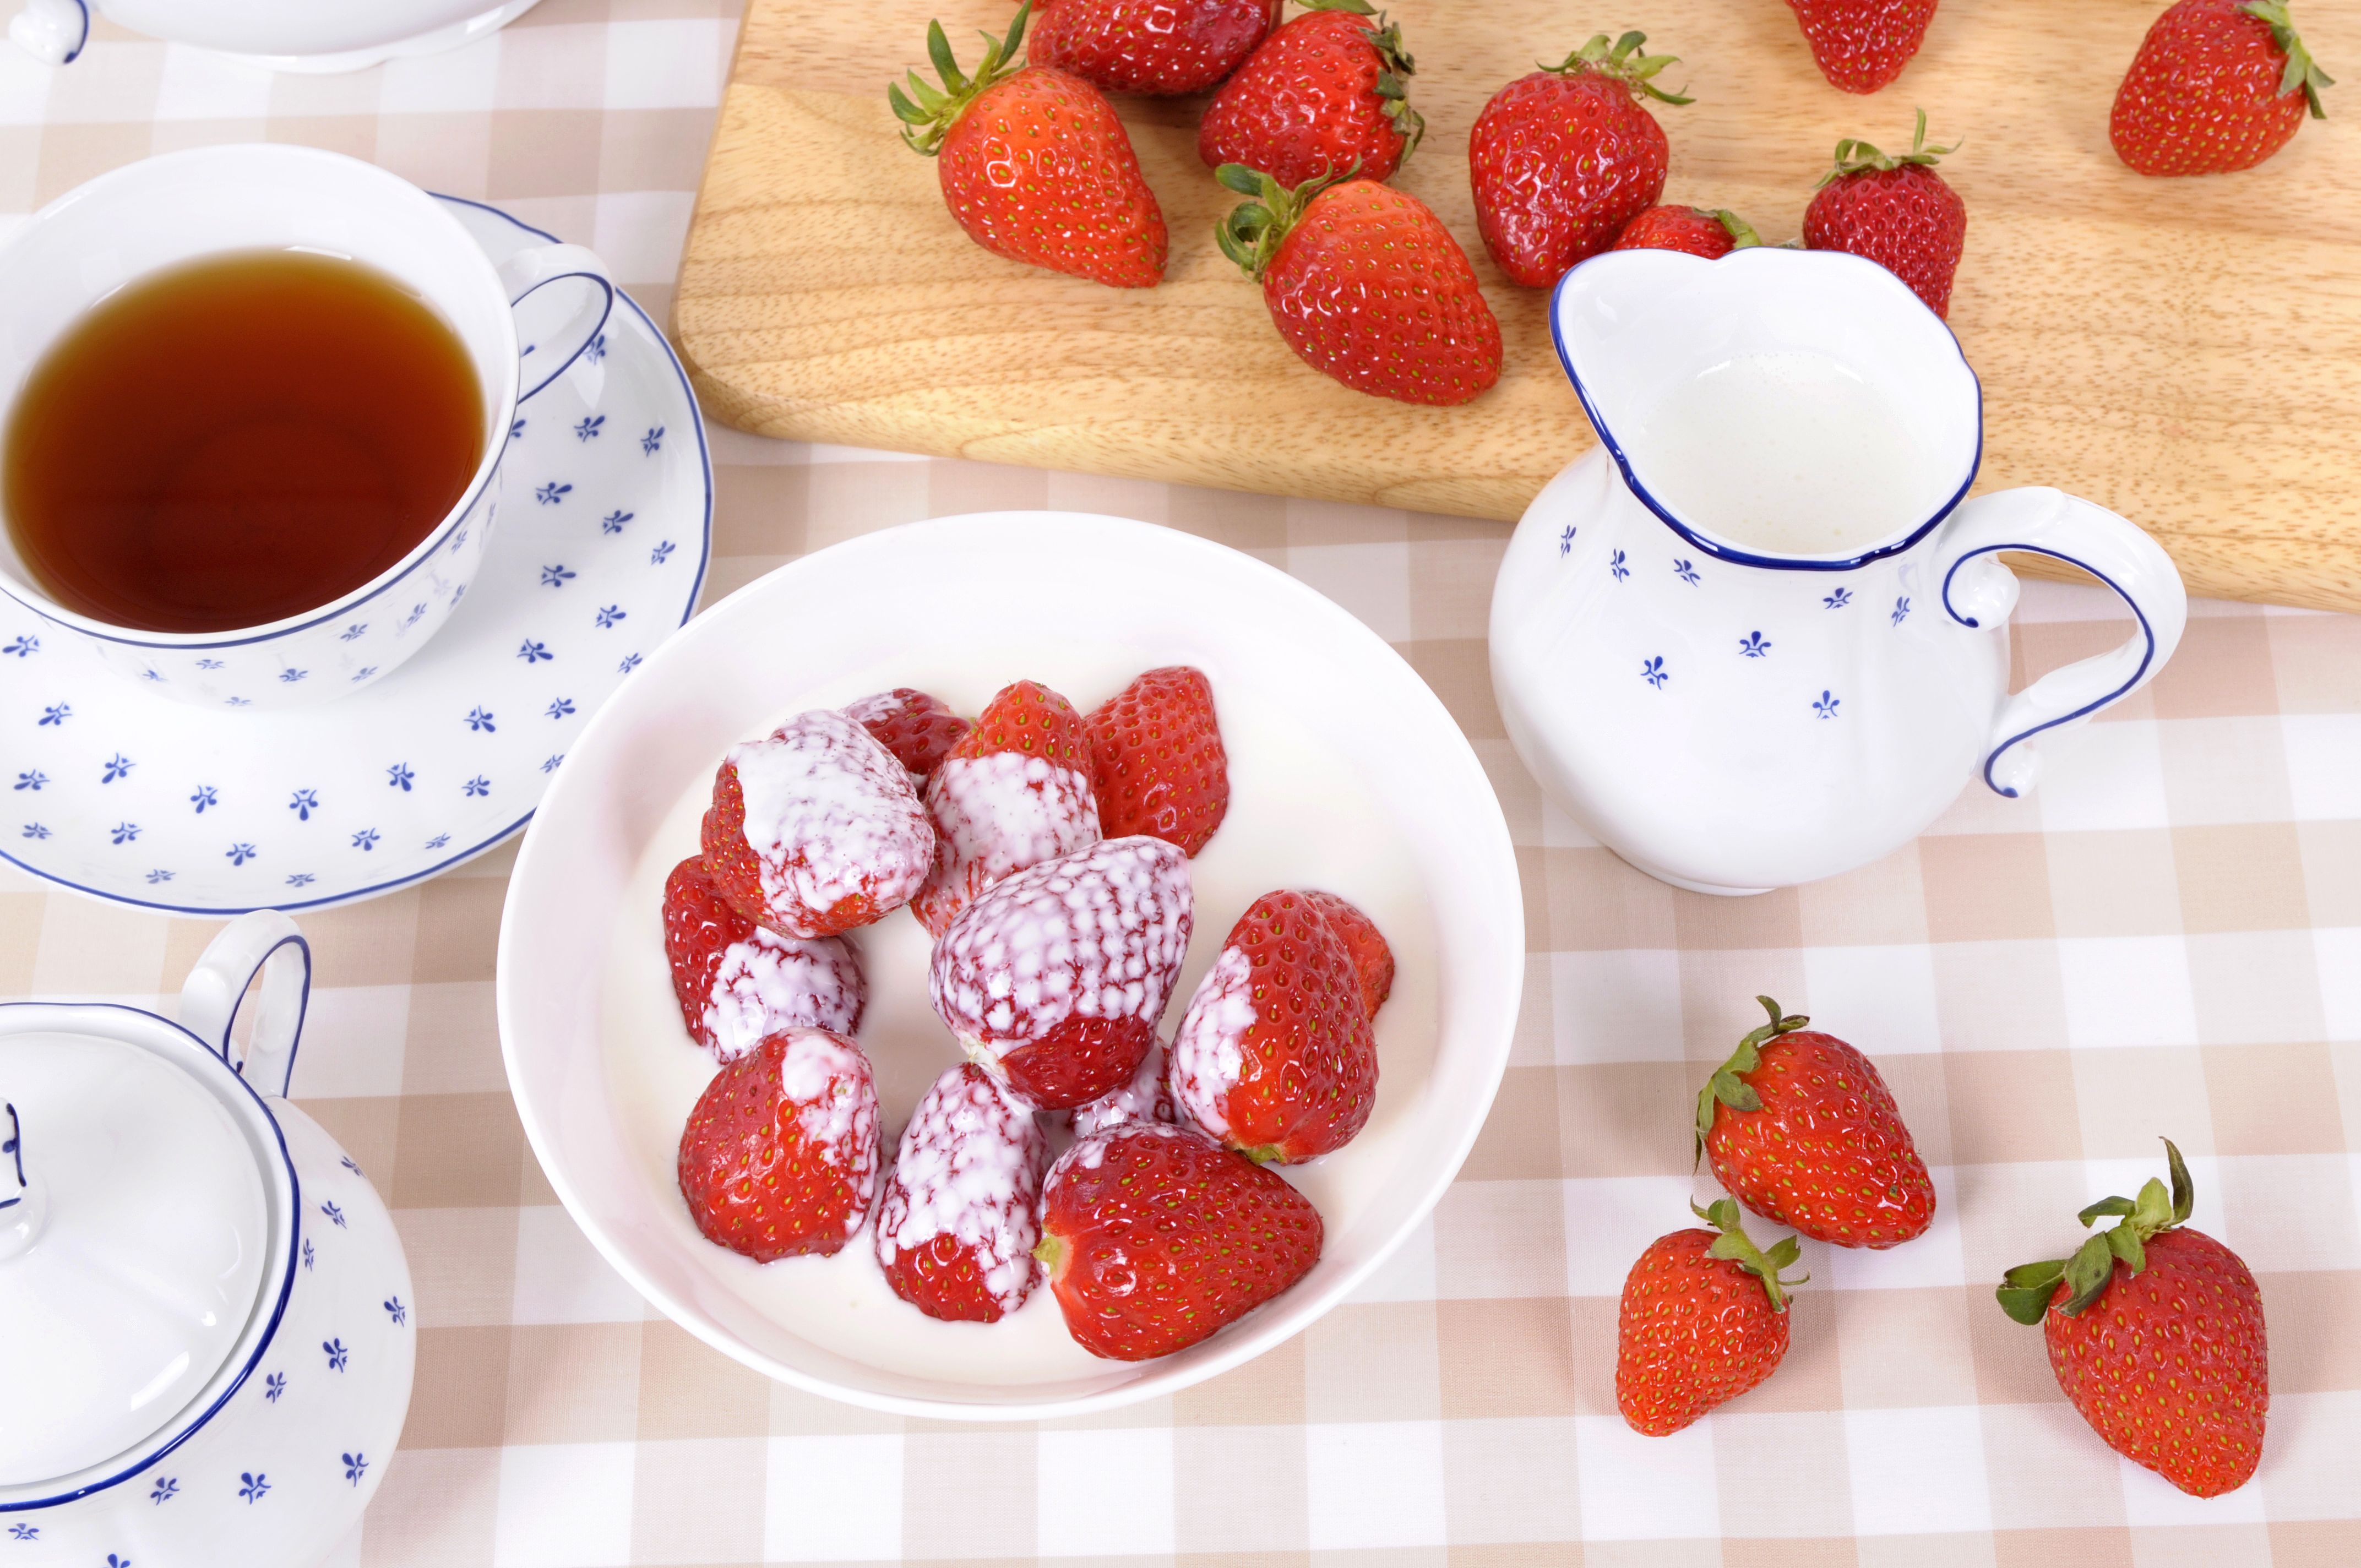 Strawberries and cream with afternoon tea.